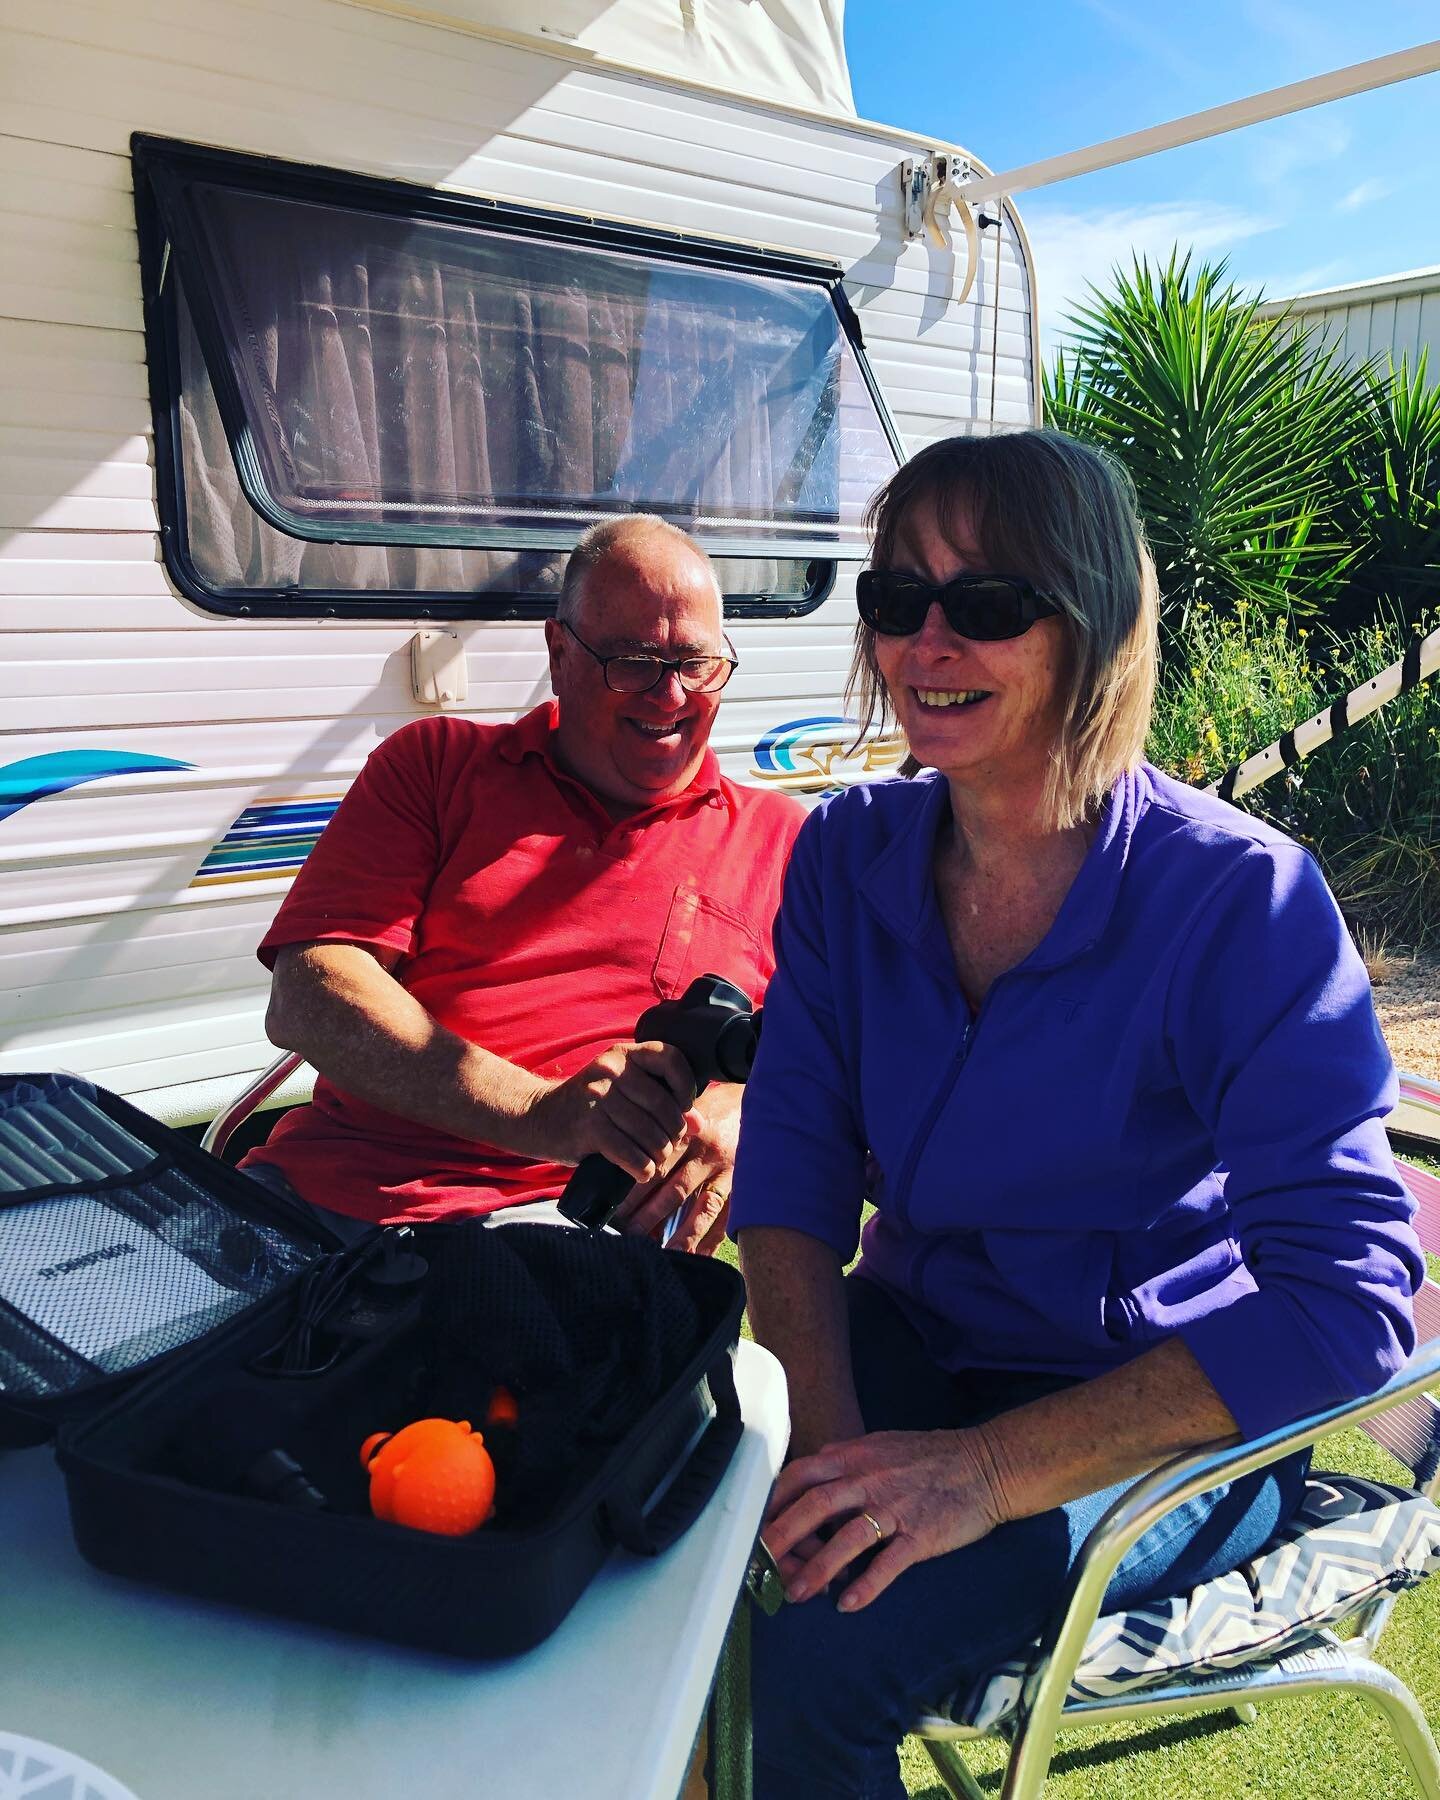 The YP Chiropractic massage guns are great addition to any caravan. So you can look after each other when you are far from home or far from any where. Contact us for yours, or drop past the clinic to give one a try #caravan #travel #greatoutdoors #si